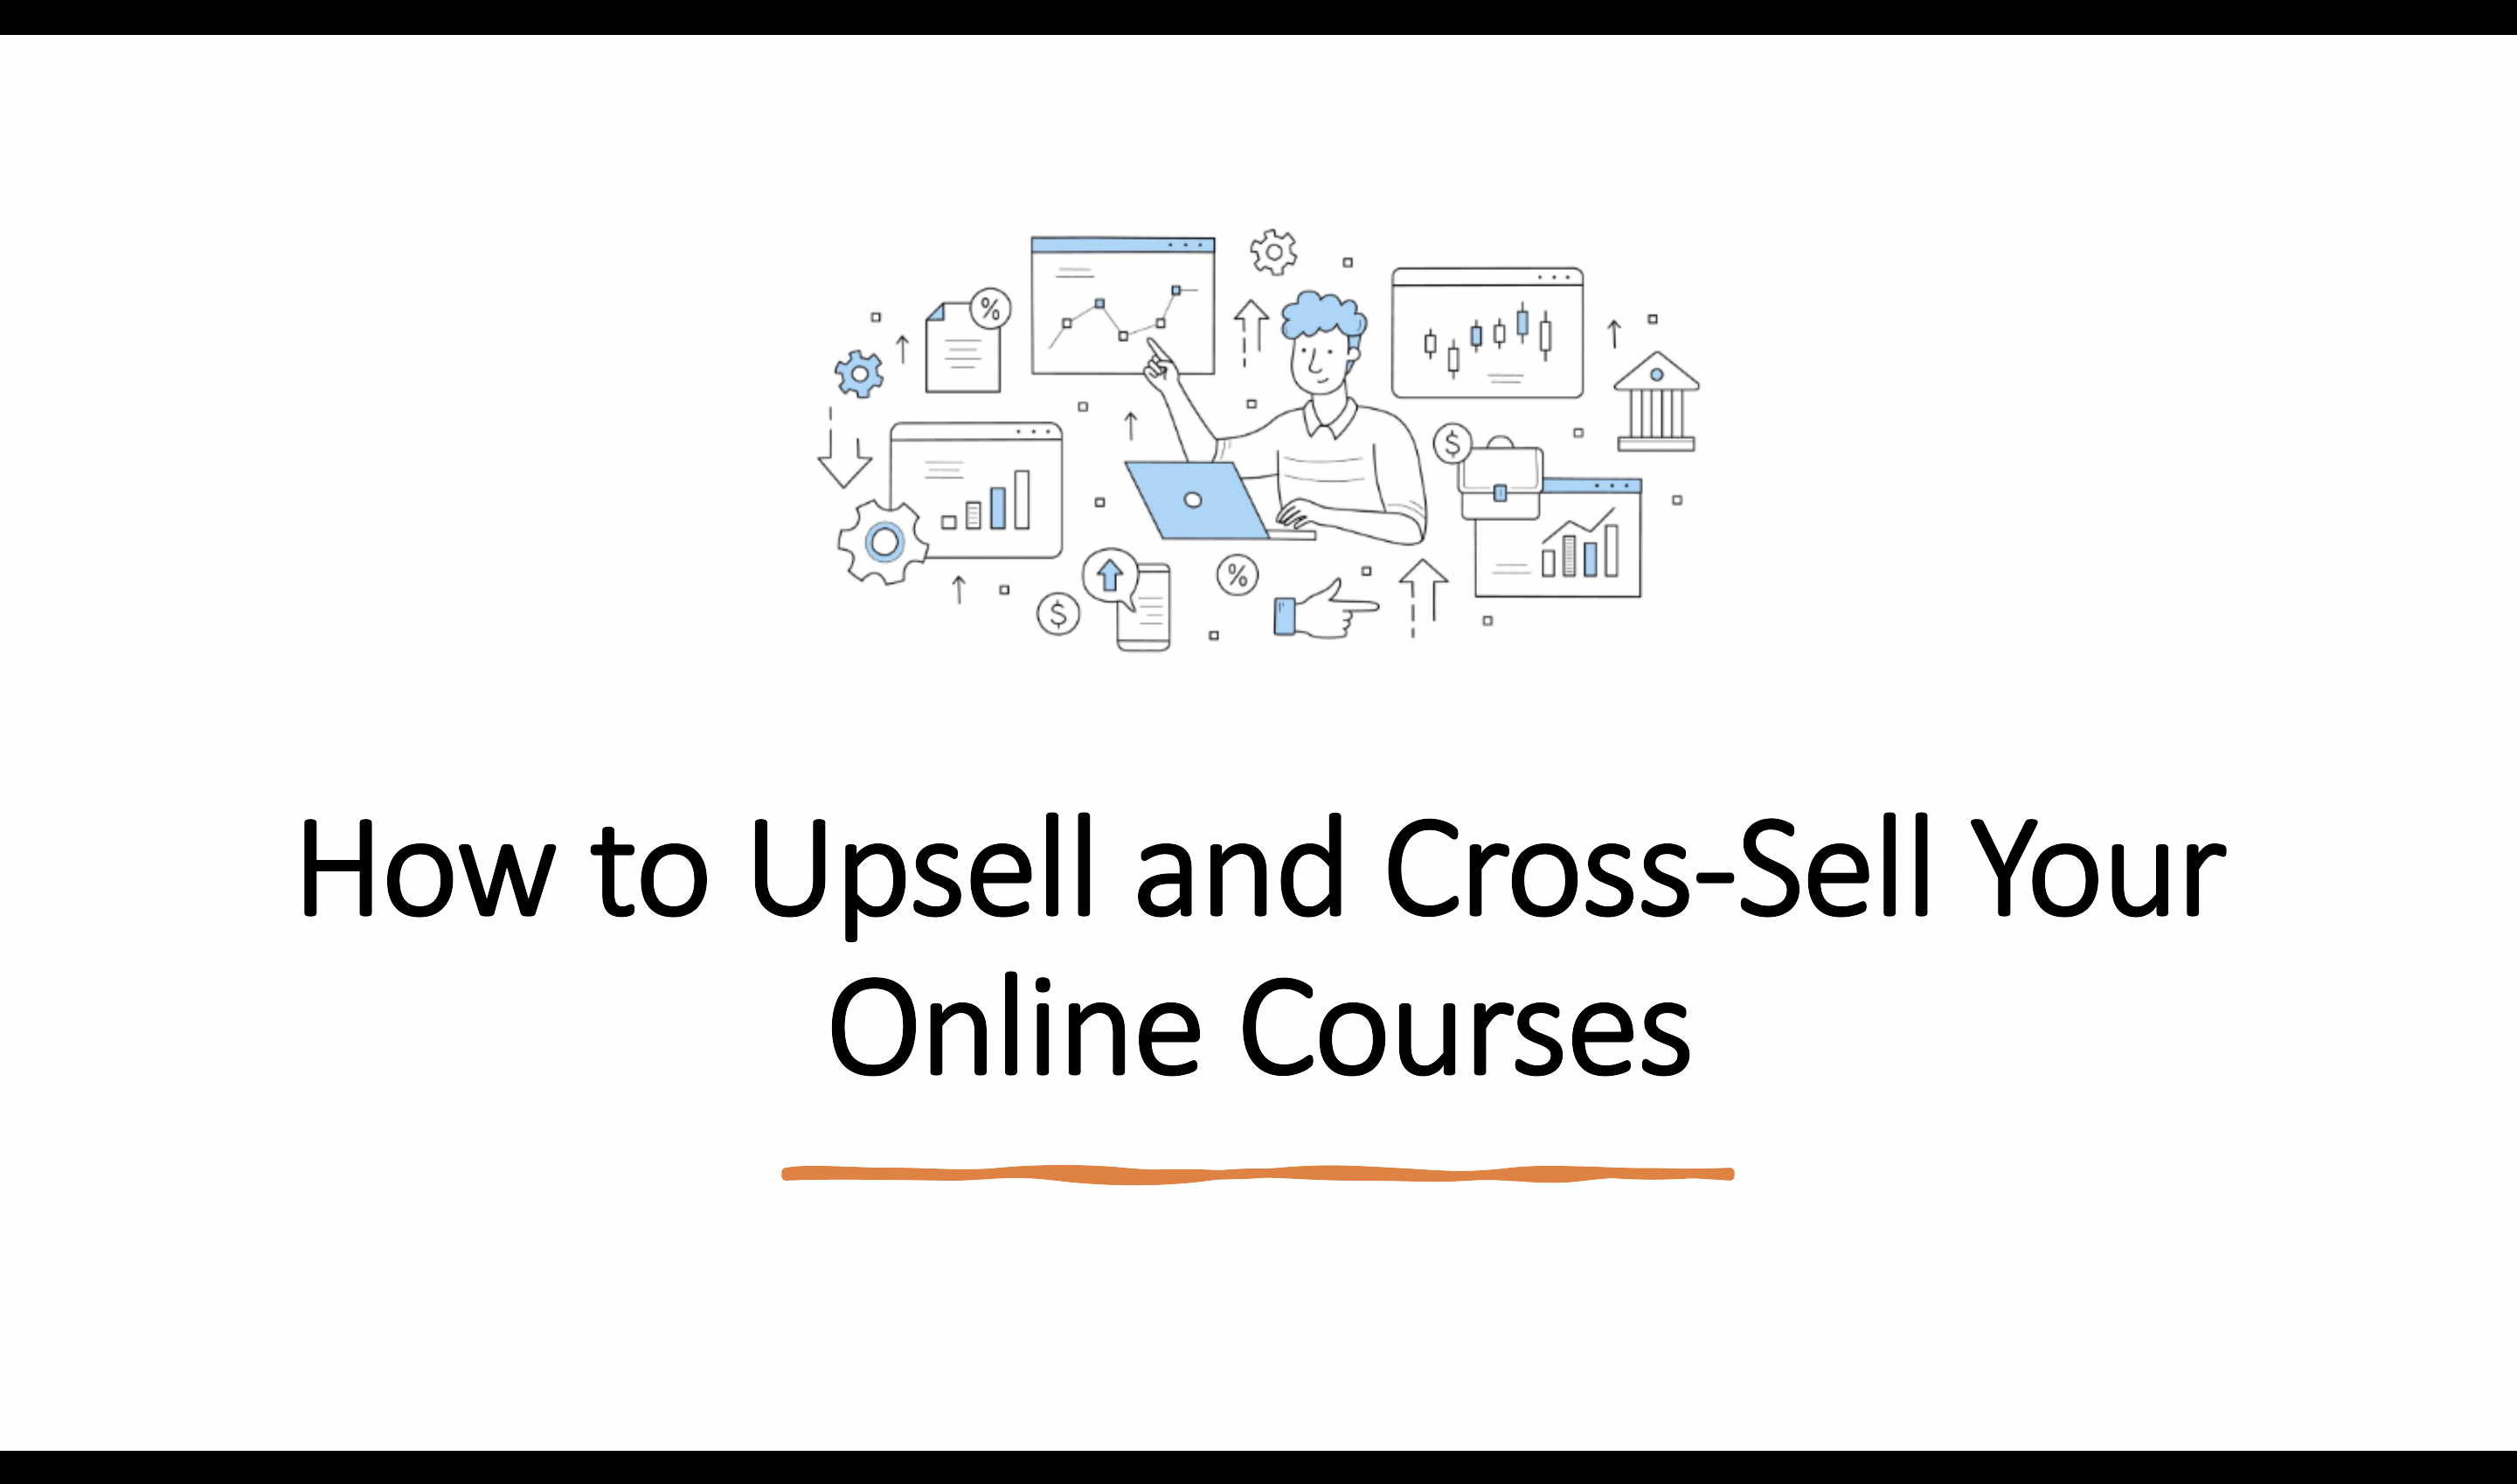 How to Upsell and Cross-Sell Your Online Courses?